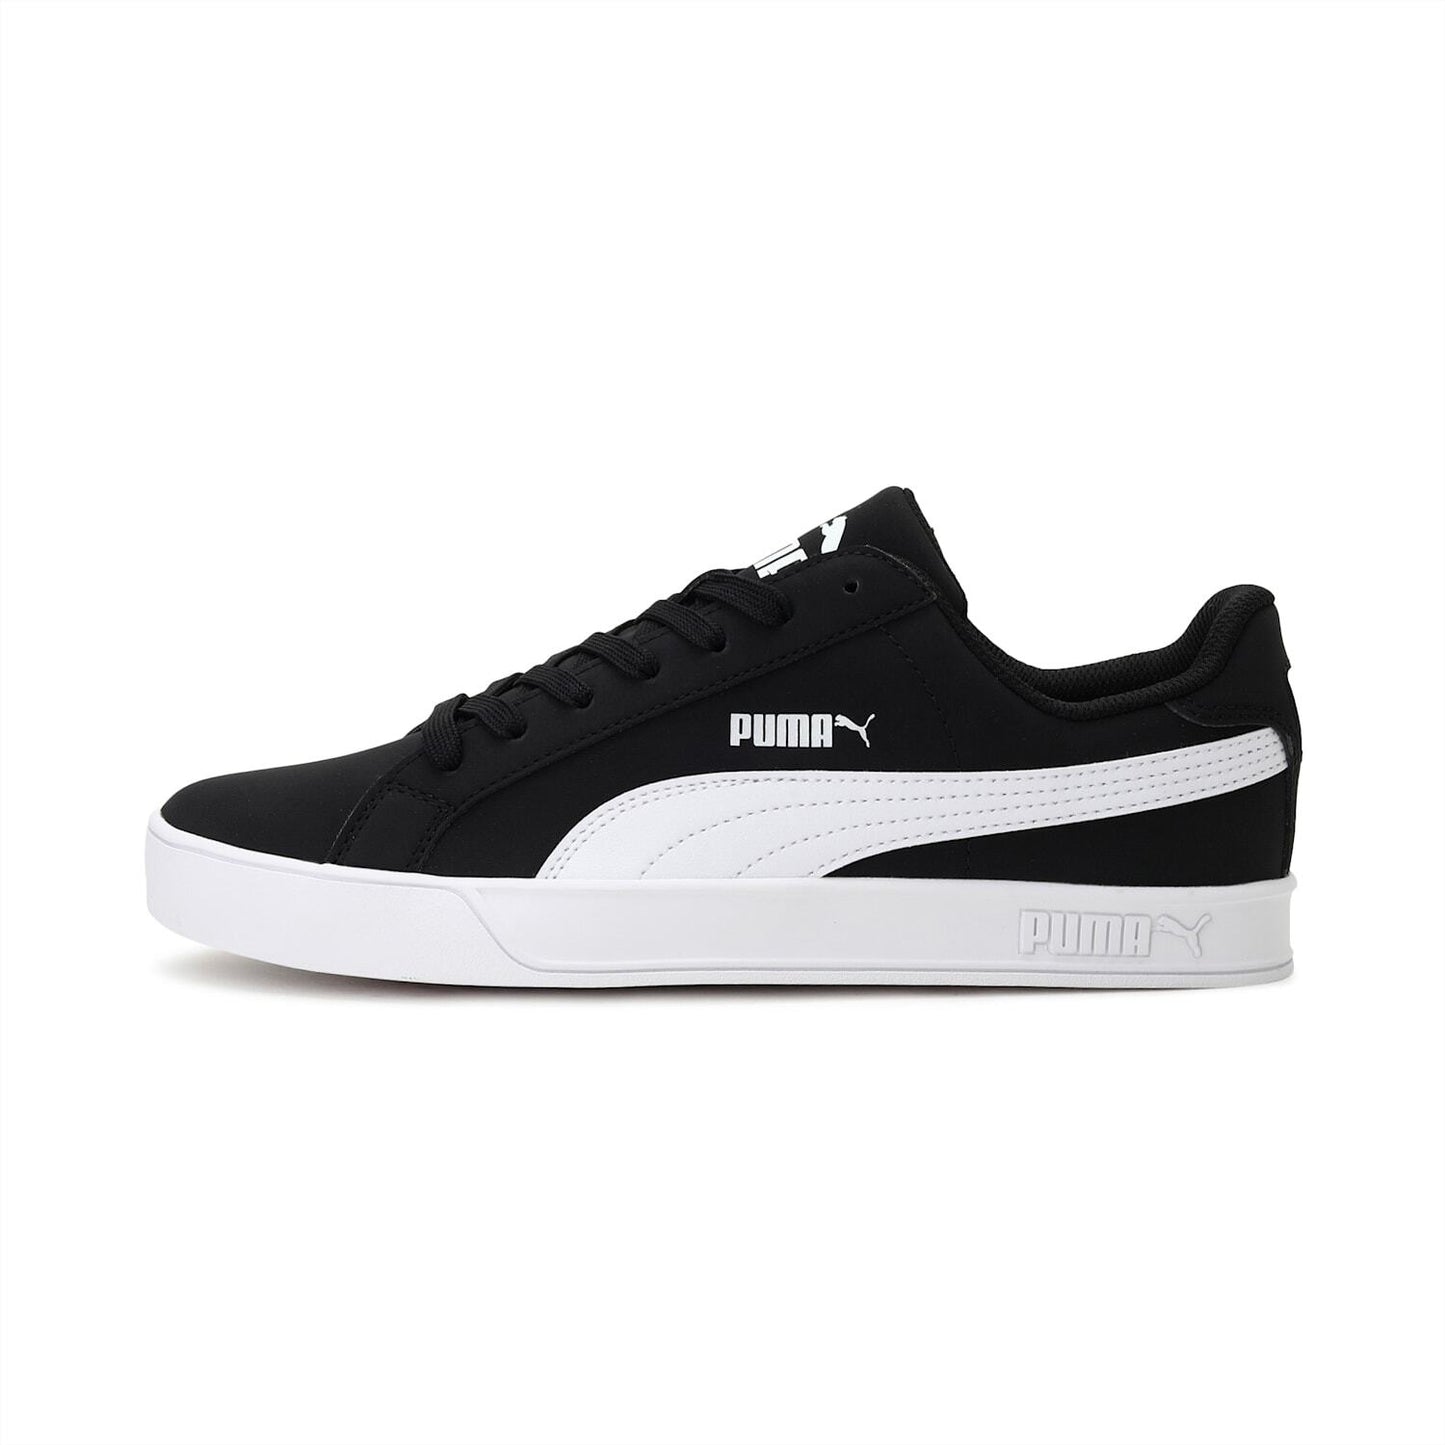 Smash Vulc Leather Trainers Shoes-359622 09